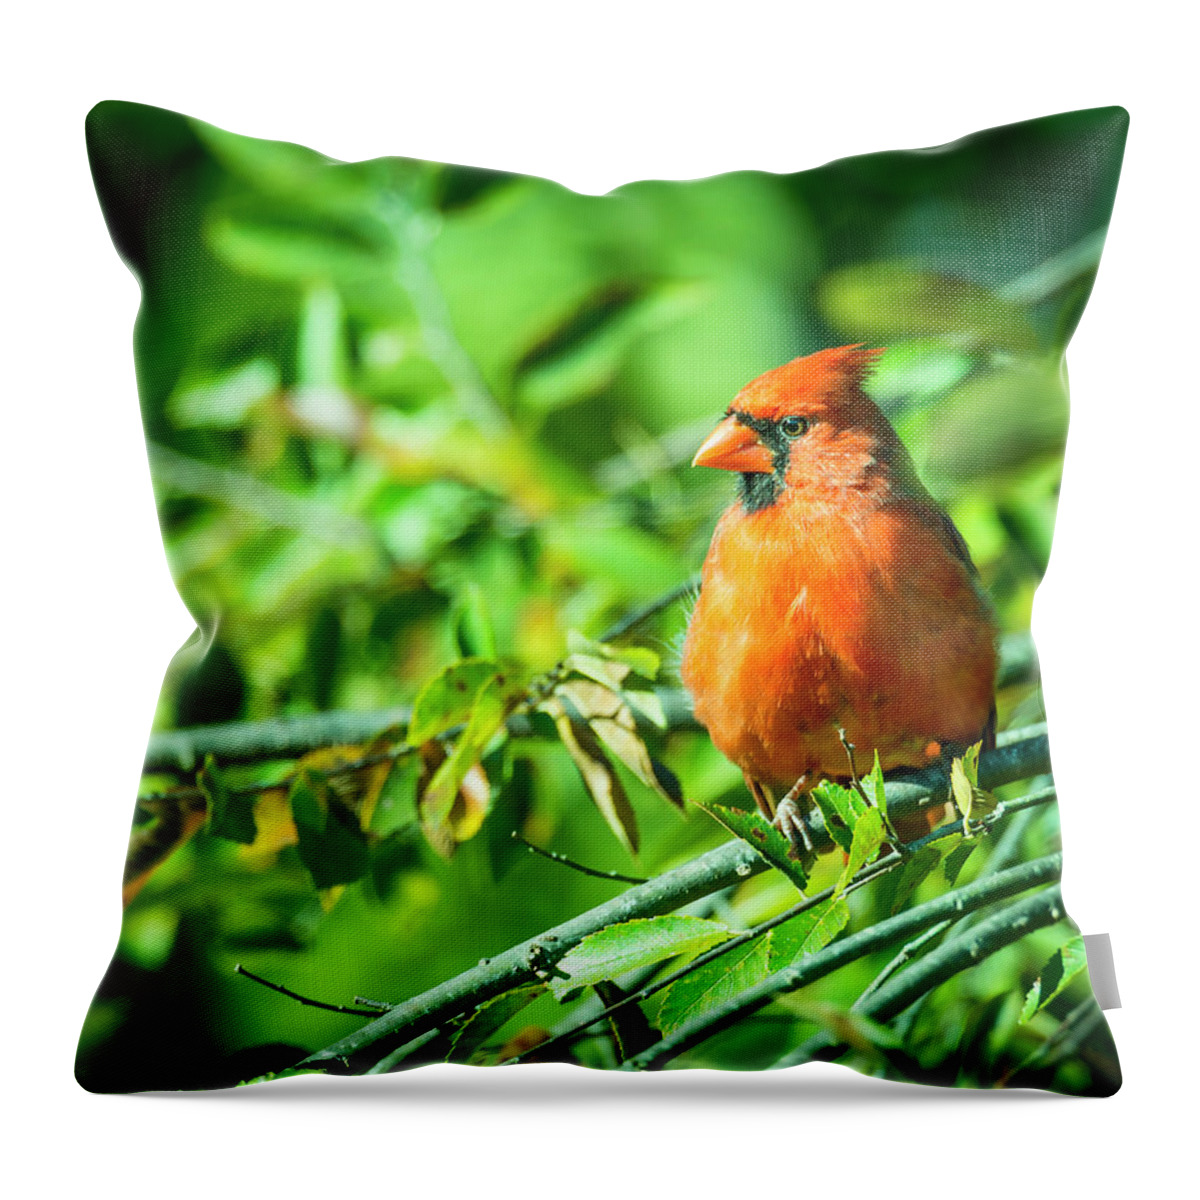 Leaves Throw Pillow featuring the photograph Male Cardinal by Phil And Karen Rispin